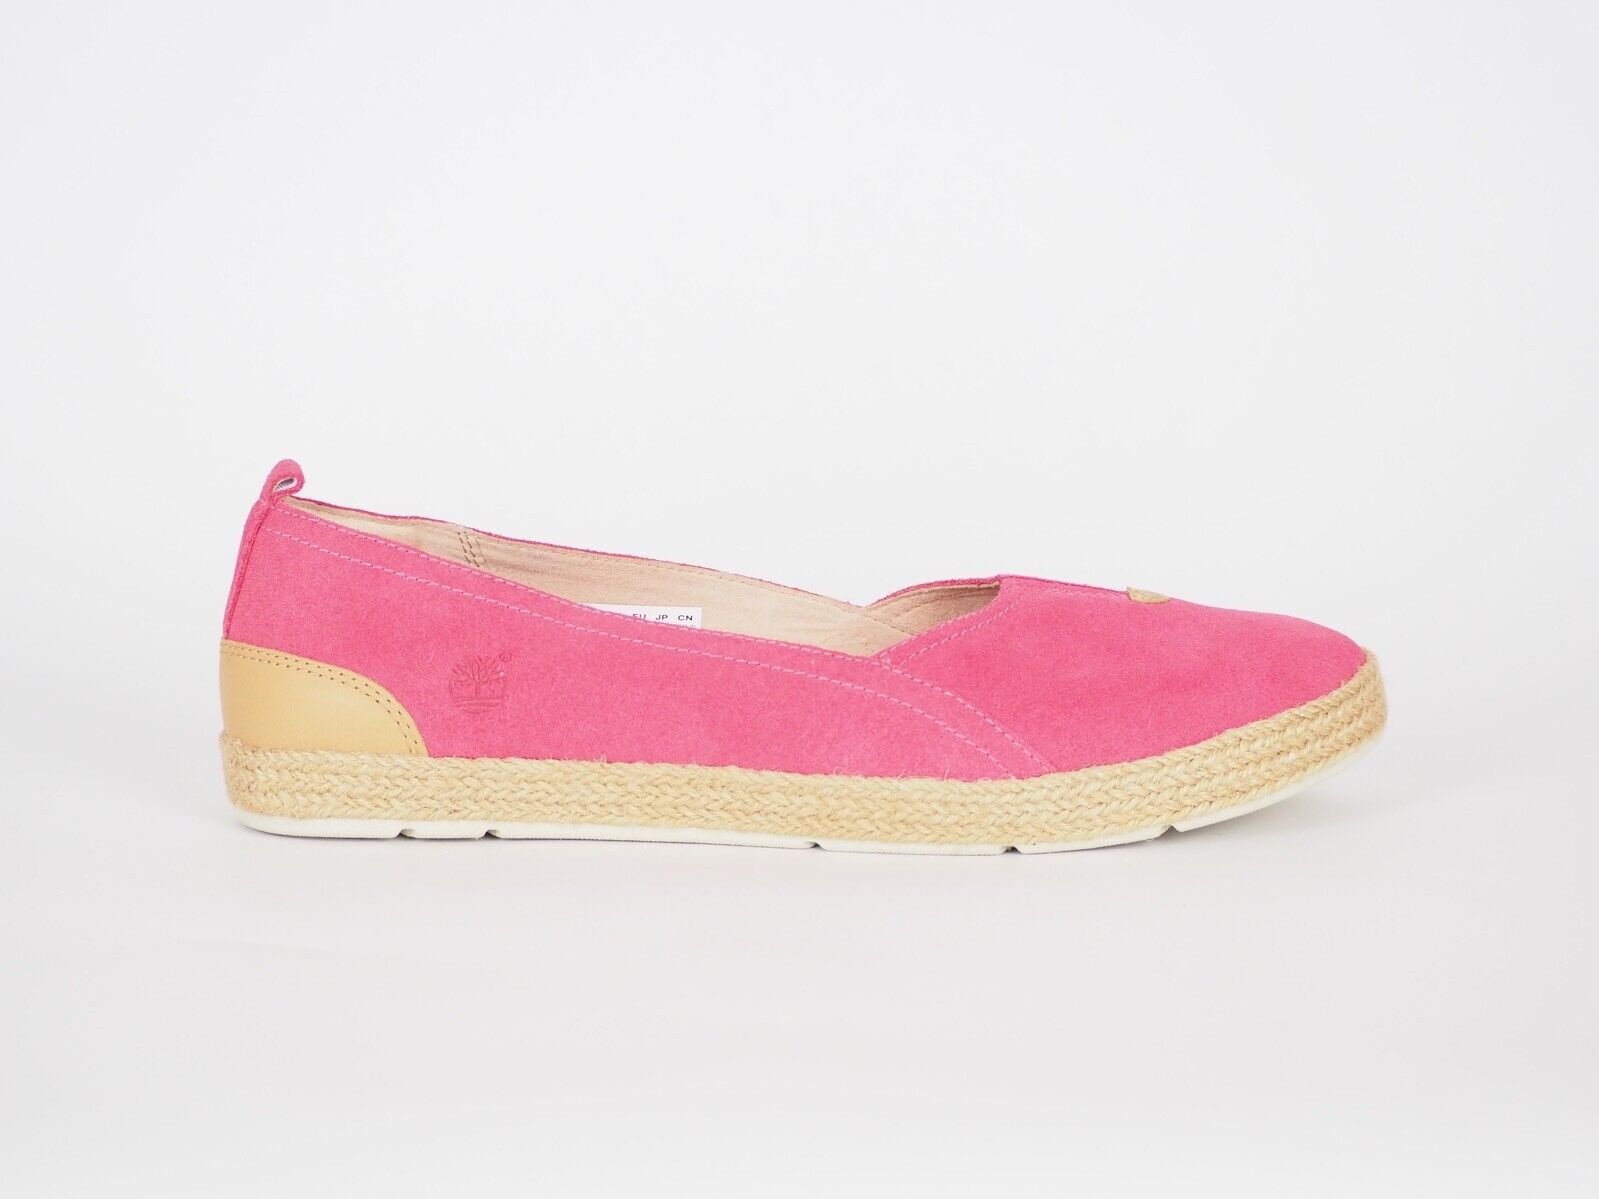 Womens Timberland EK Casco Bay 8841R Hot Pink Suede Slip On Casual Pumps Shoes